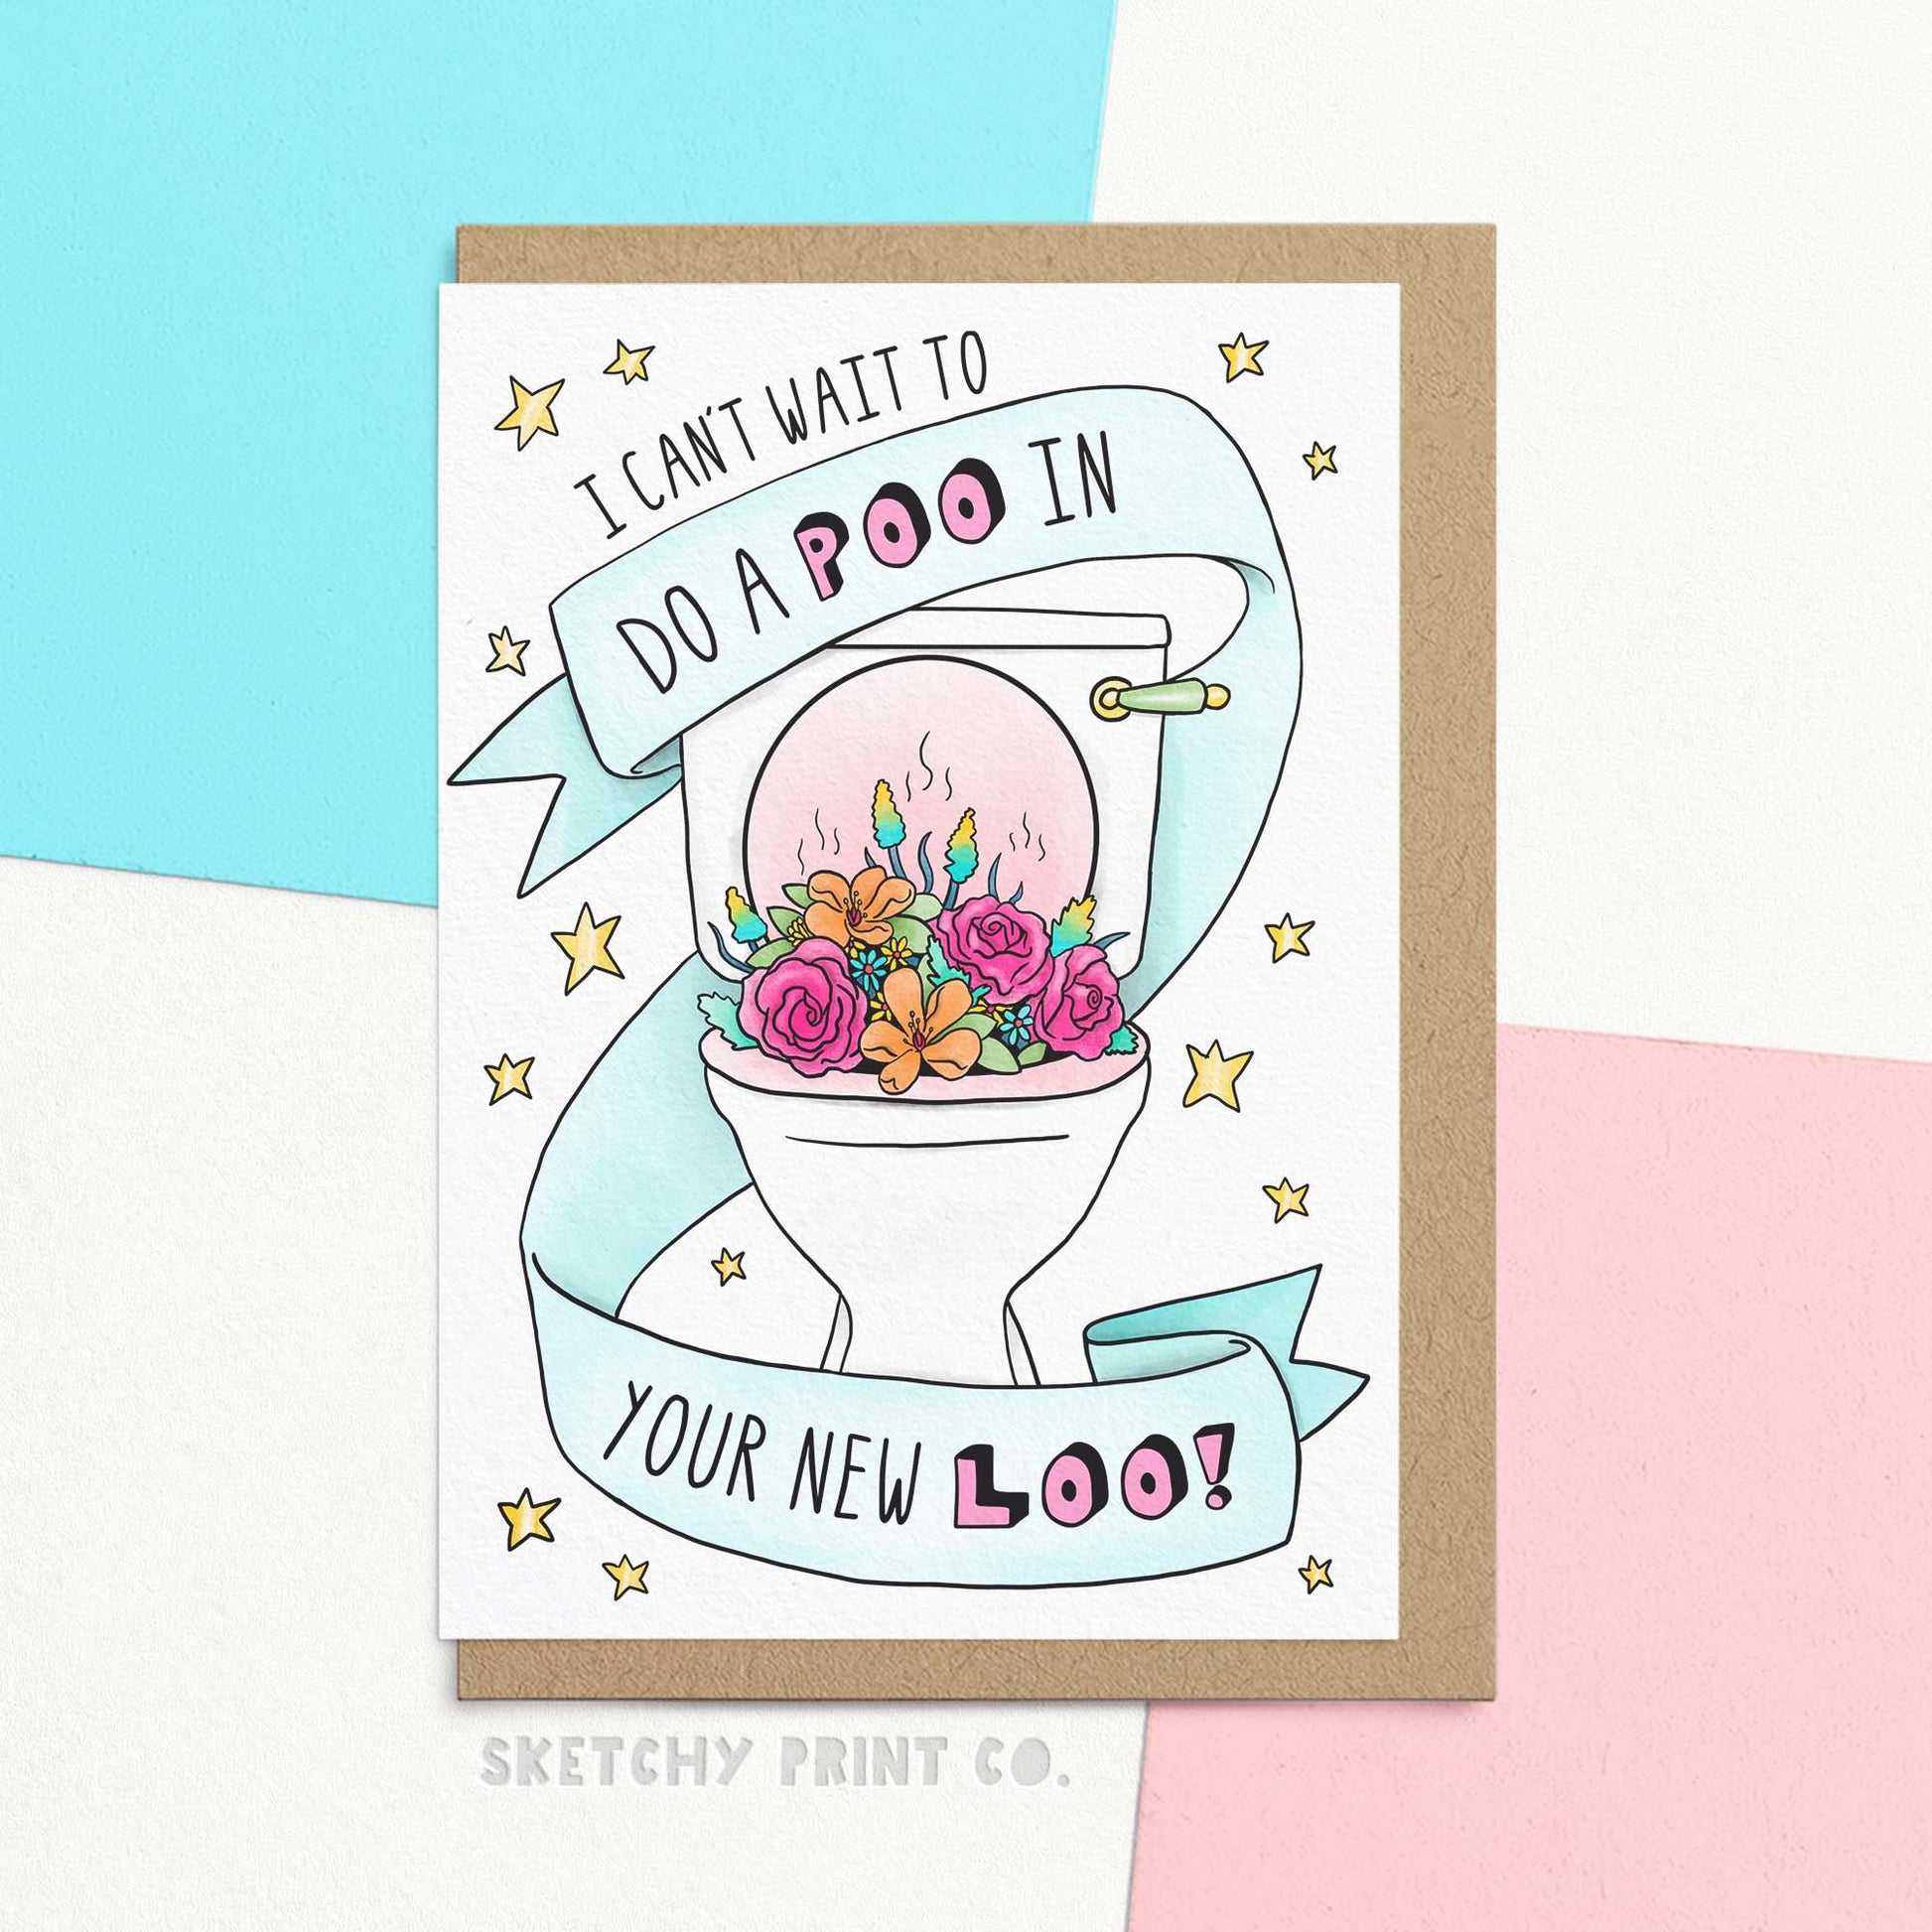 Funny new home / housewarming card reading I can't wait to do a poo in your new loo! With an illustration of a toilet with flowers in it. The perfect card to make your friend's housewarming wishes even more memorable!&nbsp;Not to mention, the FSC certified paper and compostable packaging are guaranteed to leave a lasting impression (no 'number two's included)!&nbsp;So flush those other blah cards goodbye and take a splash at this one!